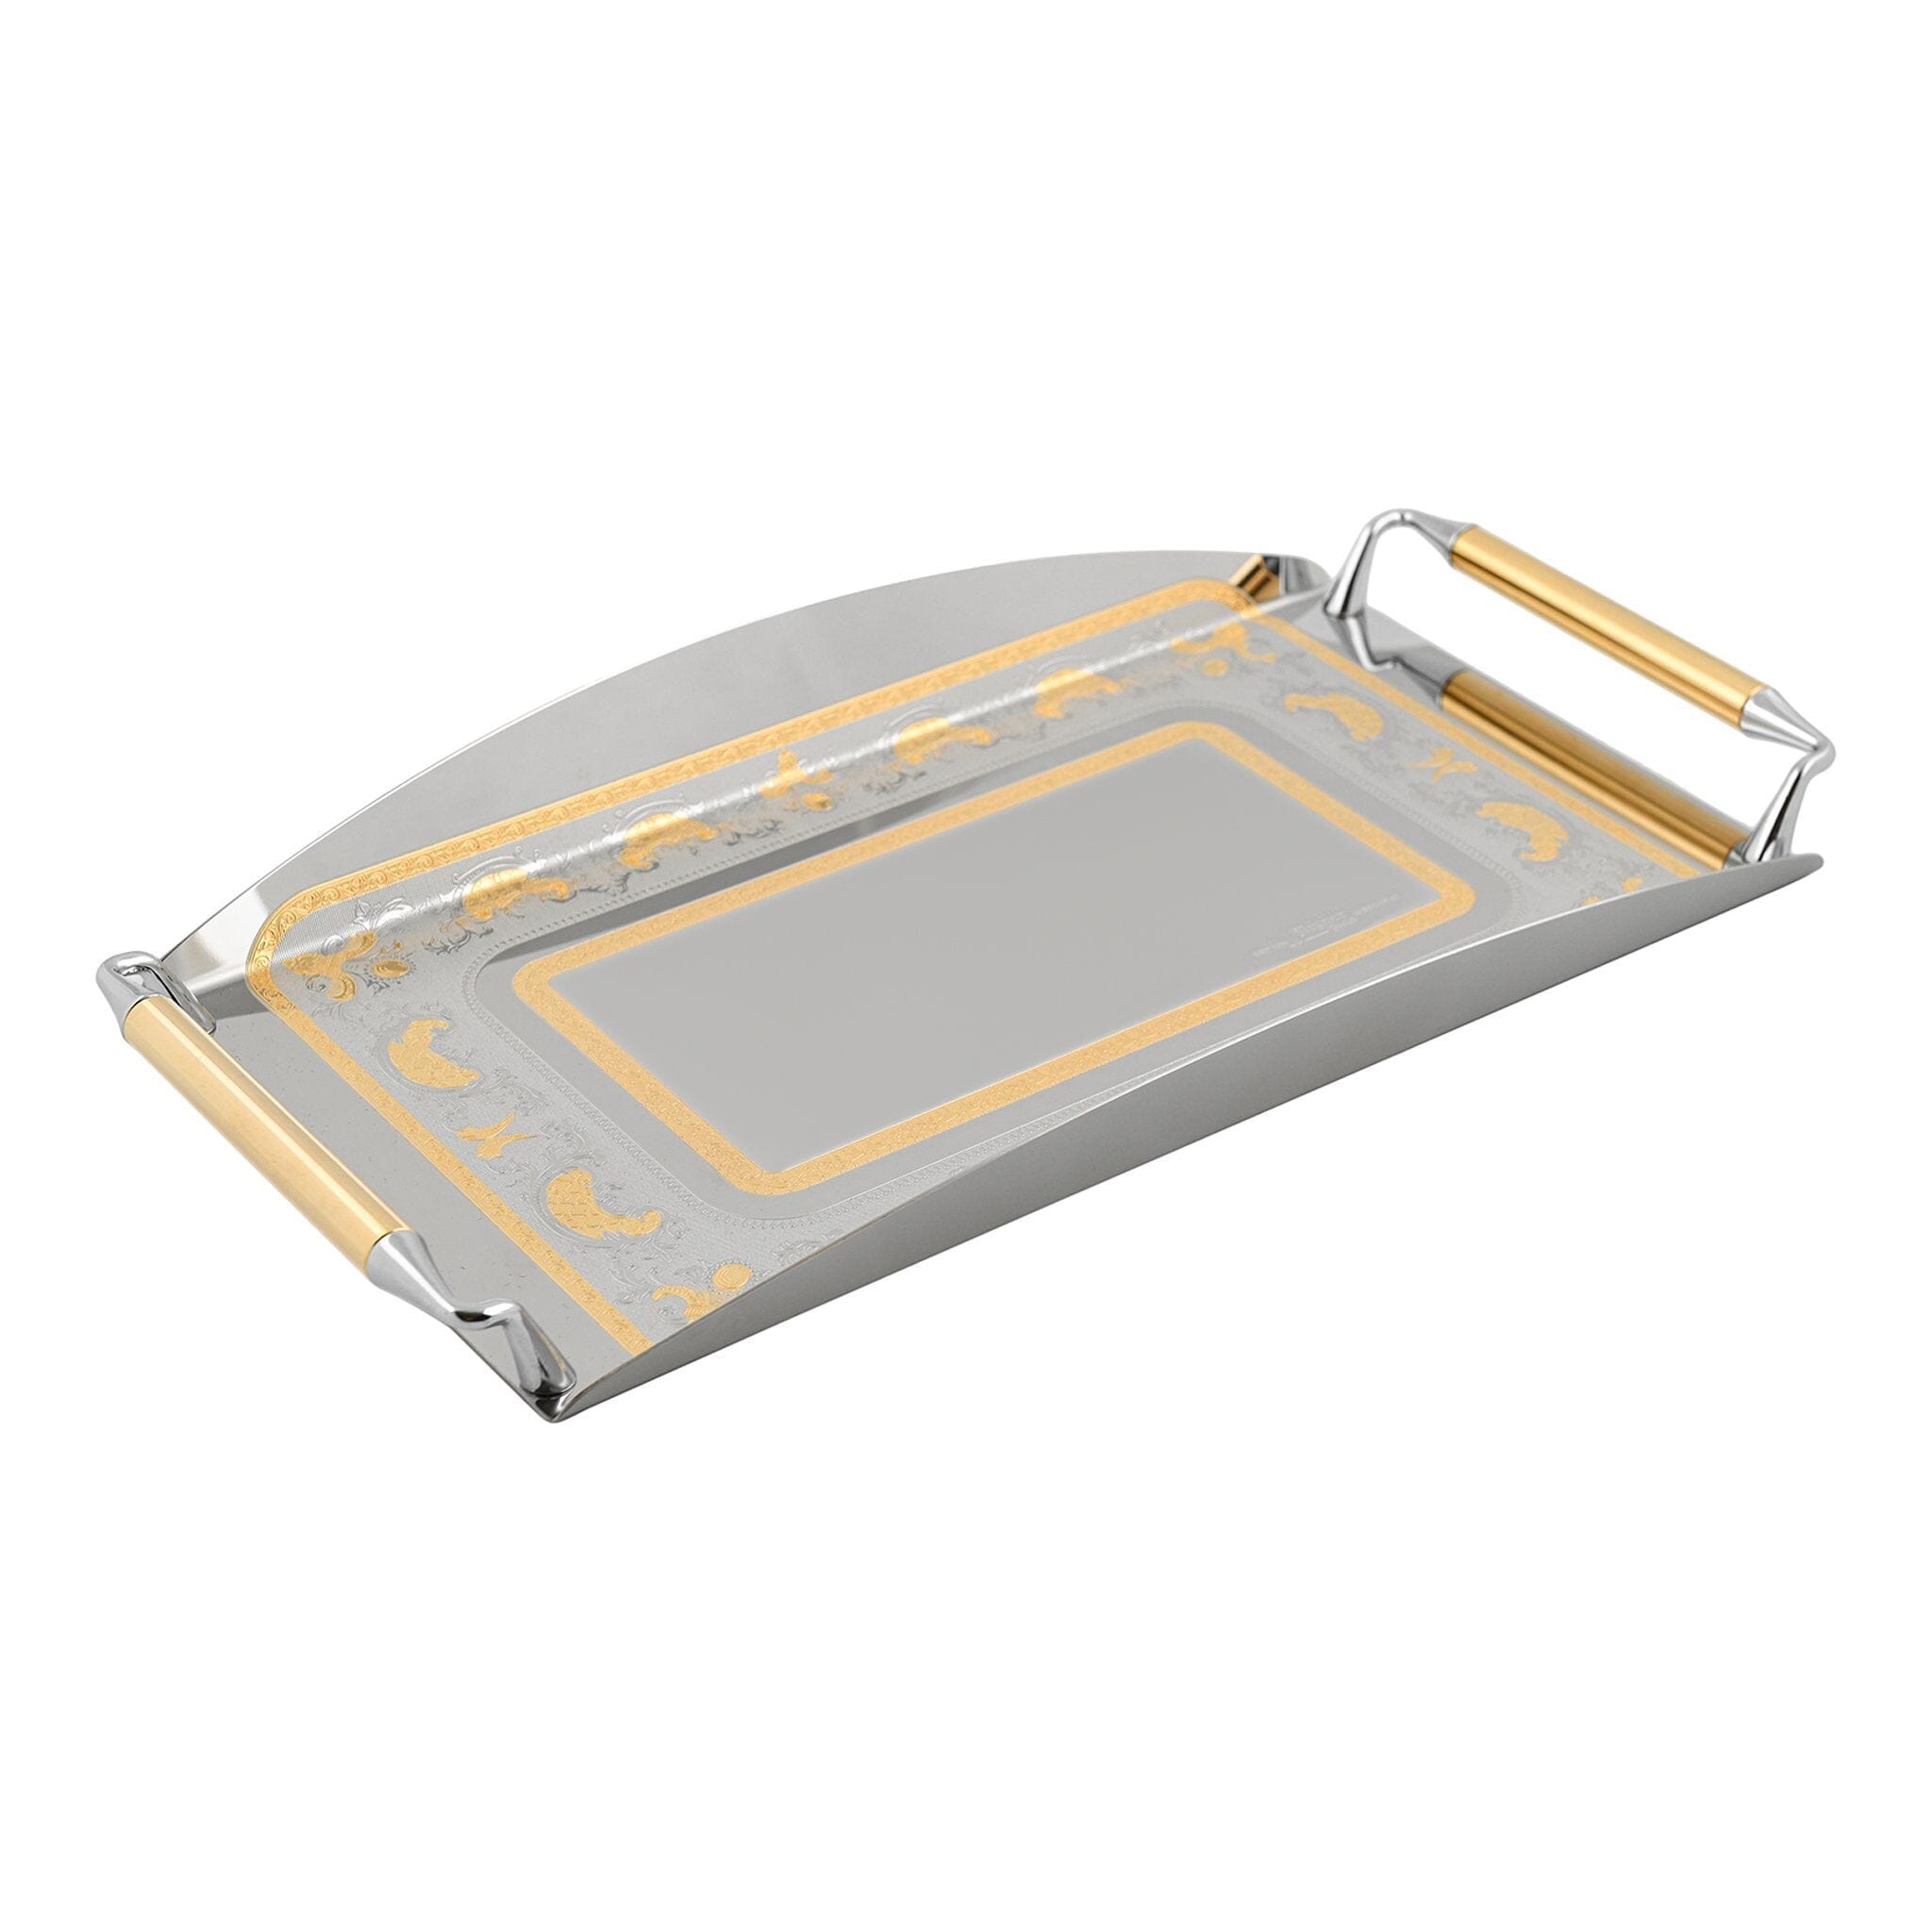 Elegant Gioiel - Rectangular Tray with Handles - Gold - Stainless Steel 18/10 - 40x25cm - 75000162